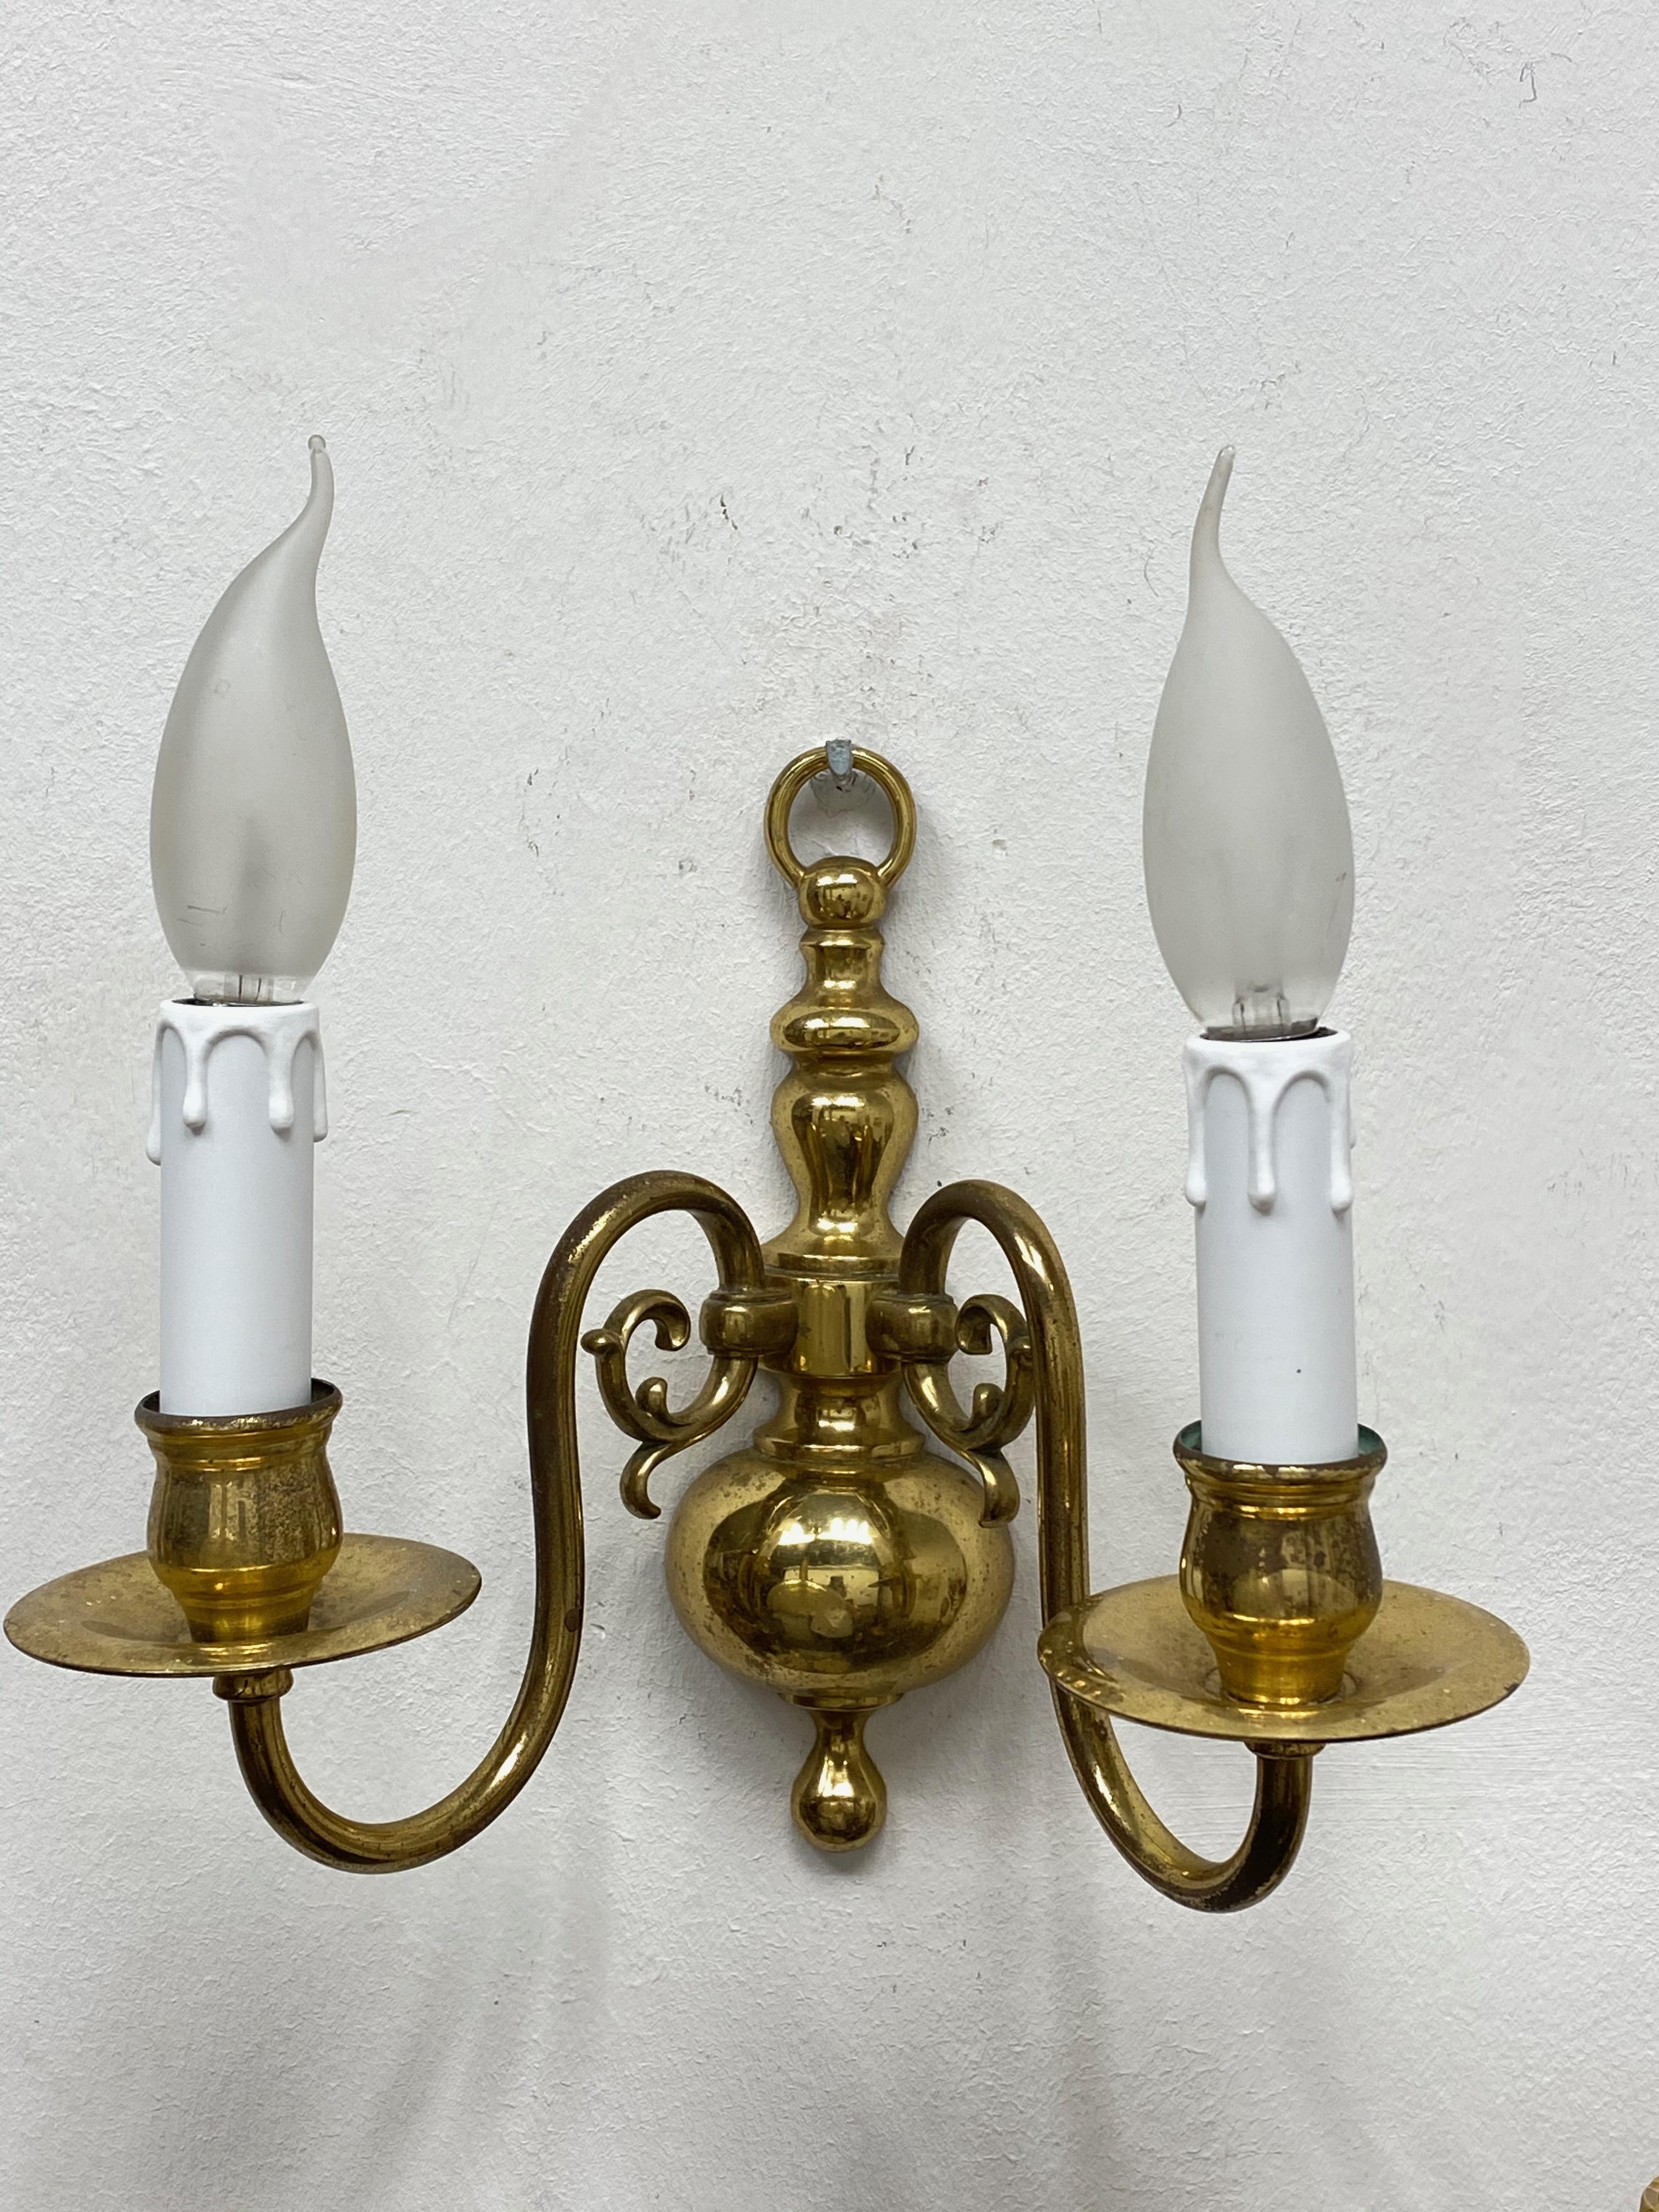 Mid-20th Century Pair of Solid Brass Two-Light Wall Sconces, Vintage, German, 1960s